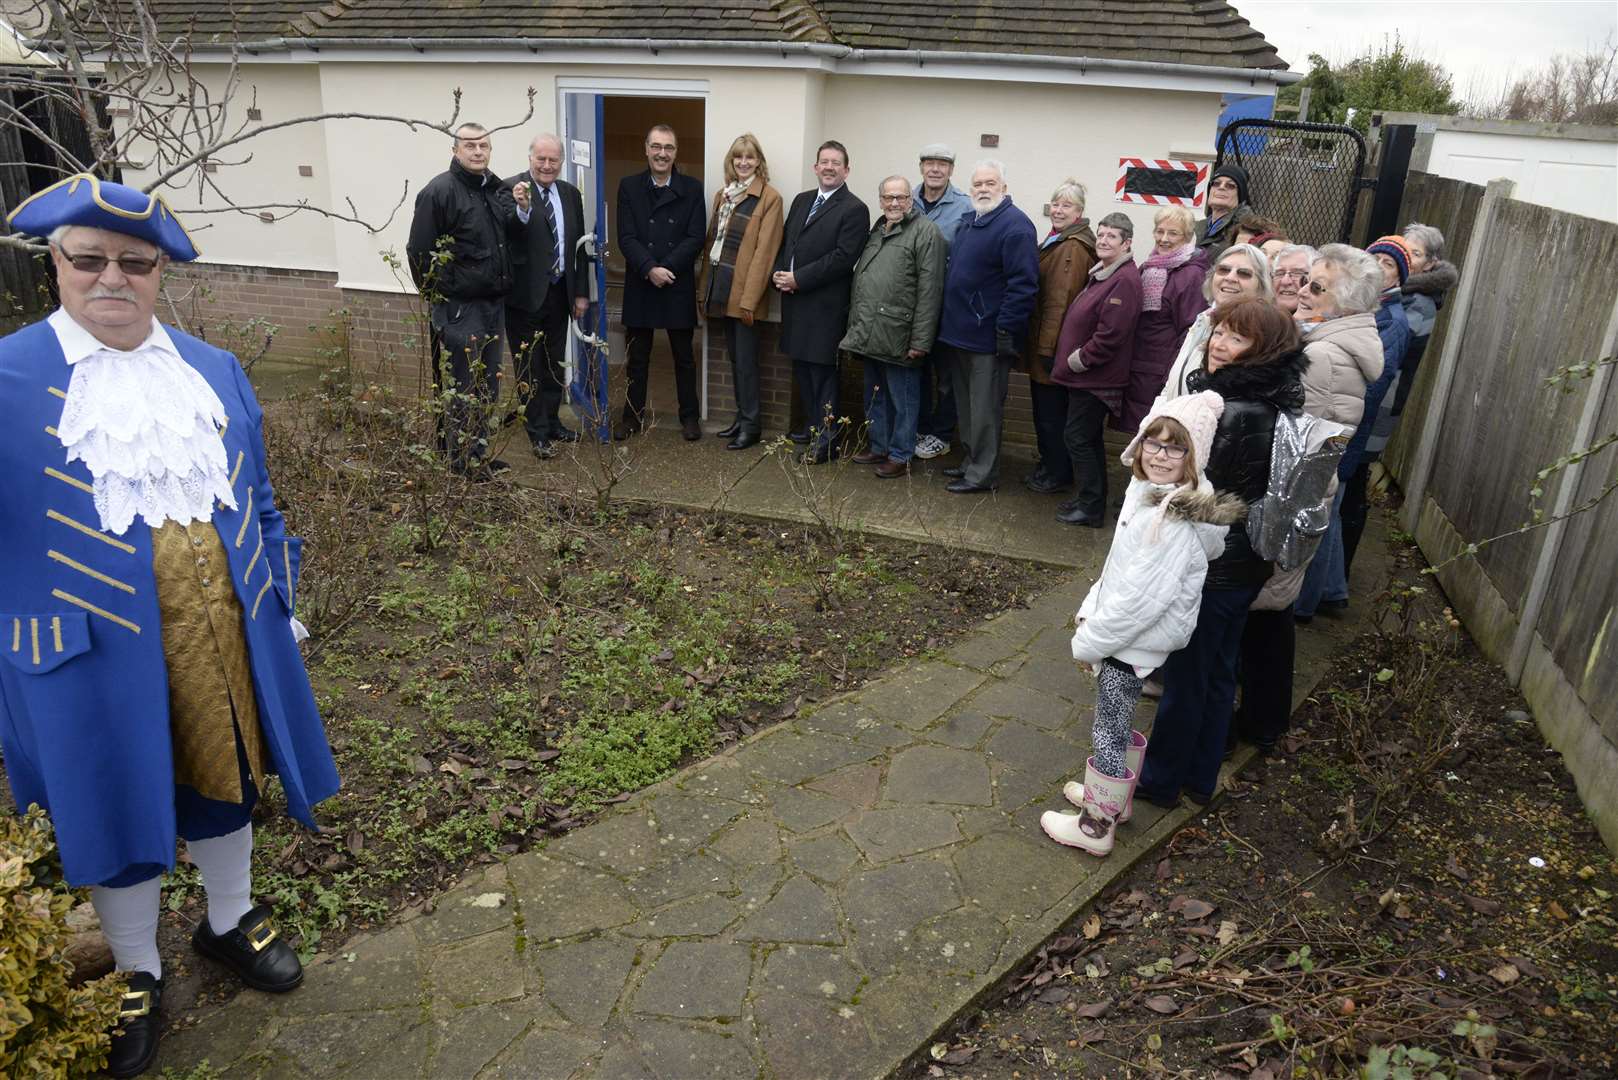 Campaigners at the reopening of the public toilets in Beltinge in 2017